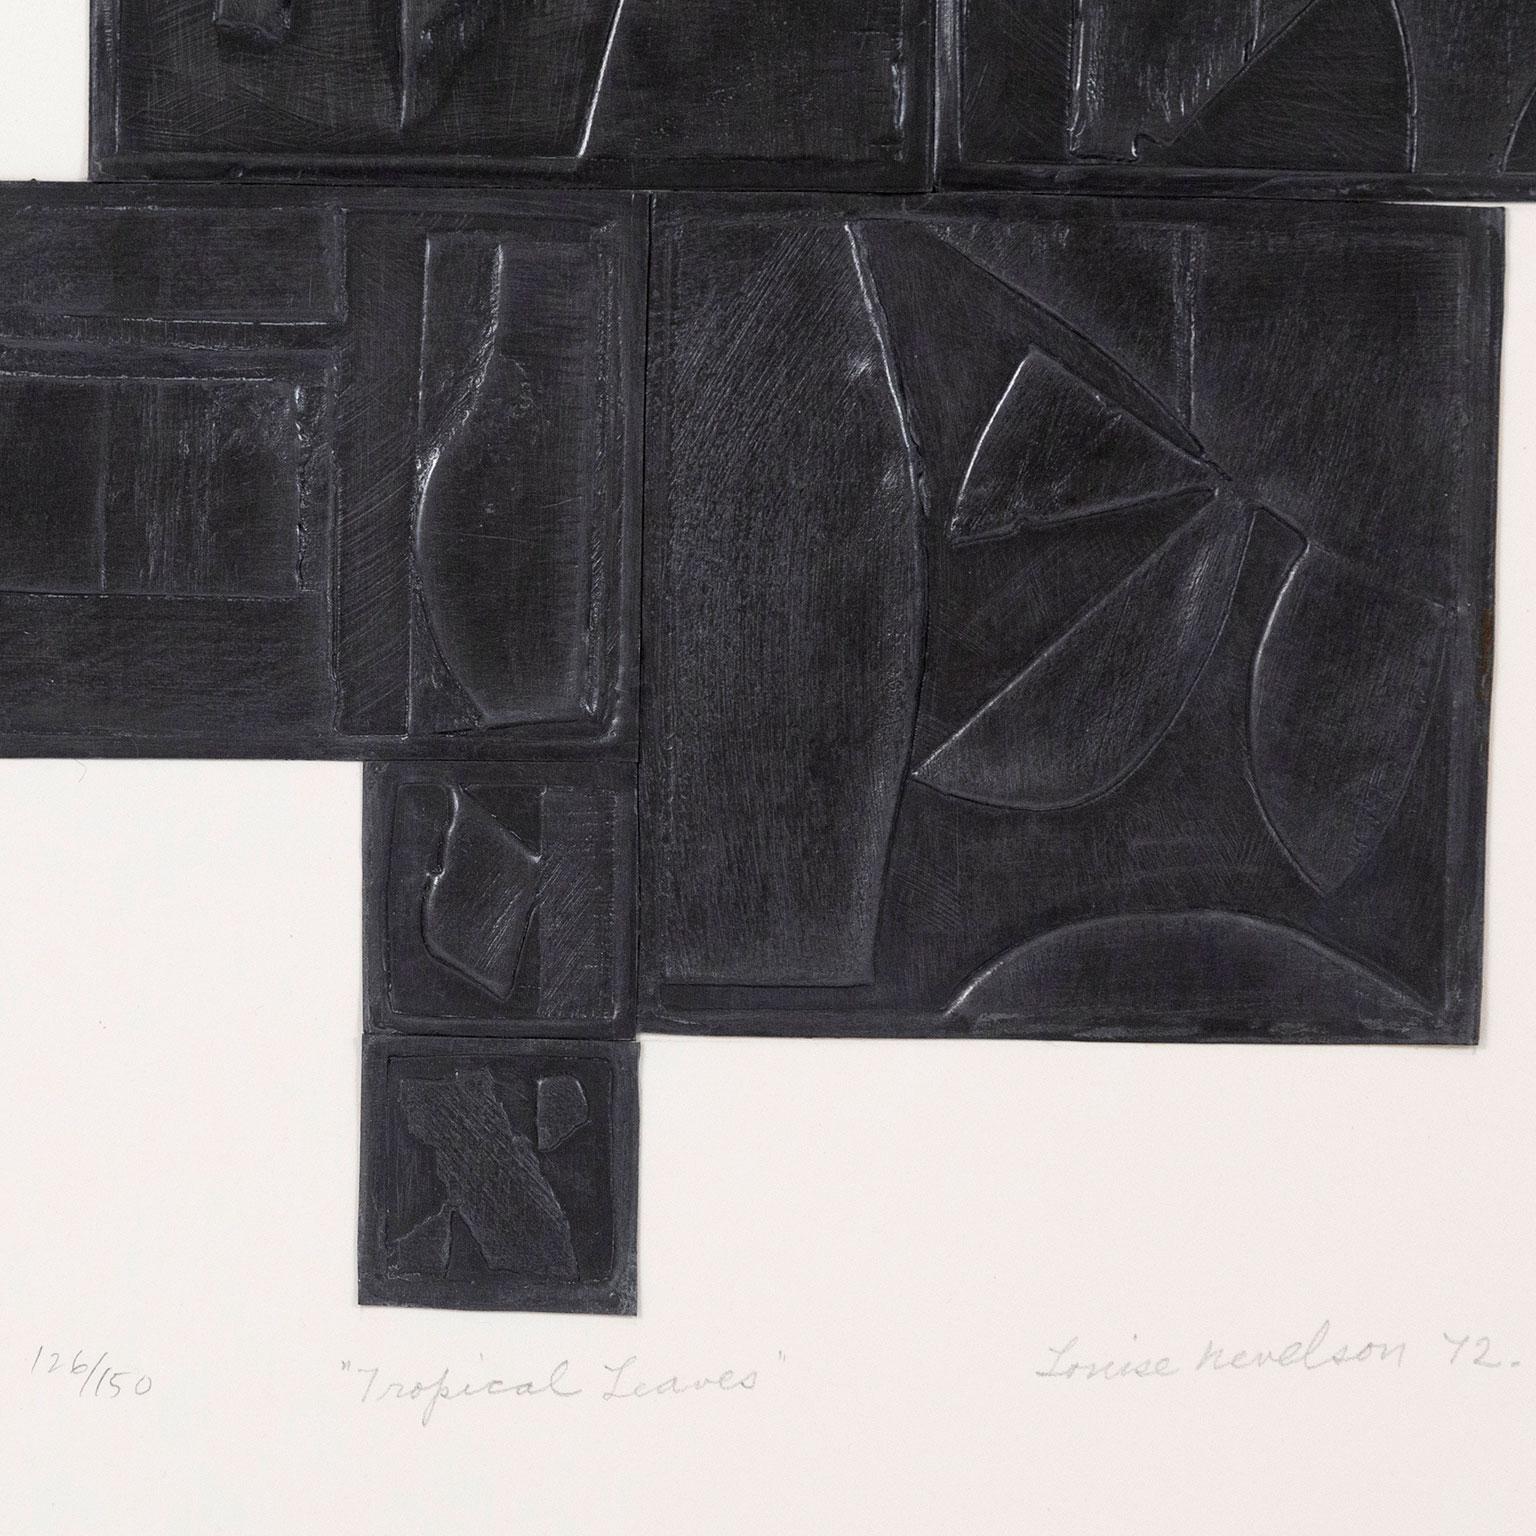 As always, Caviar20 is thrilled to present the esteemed work of Louise Nevelson - one of the most revered and unique artists of the 20th century.  

Although Nevelson is best known for her work as a sculptor, like many of her American